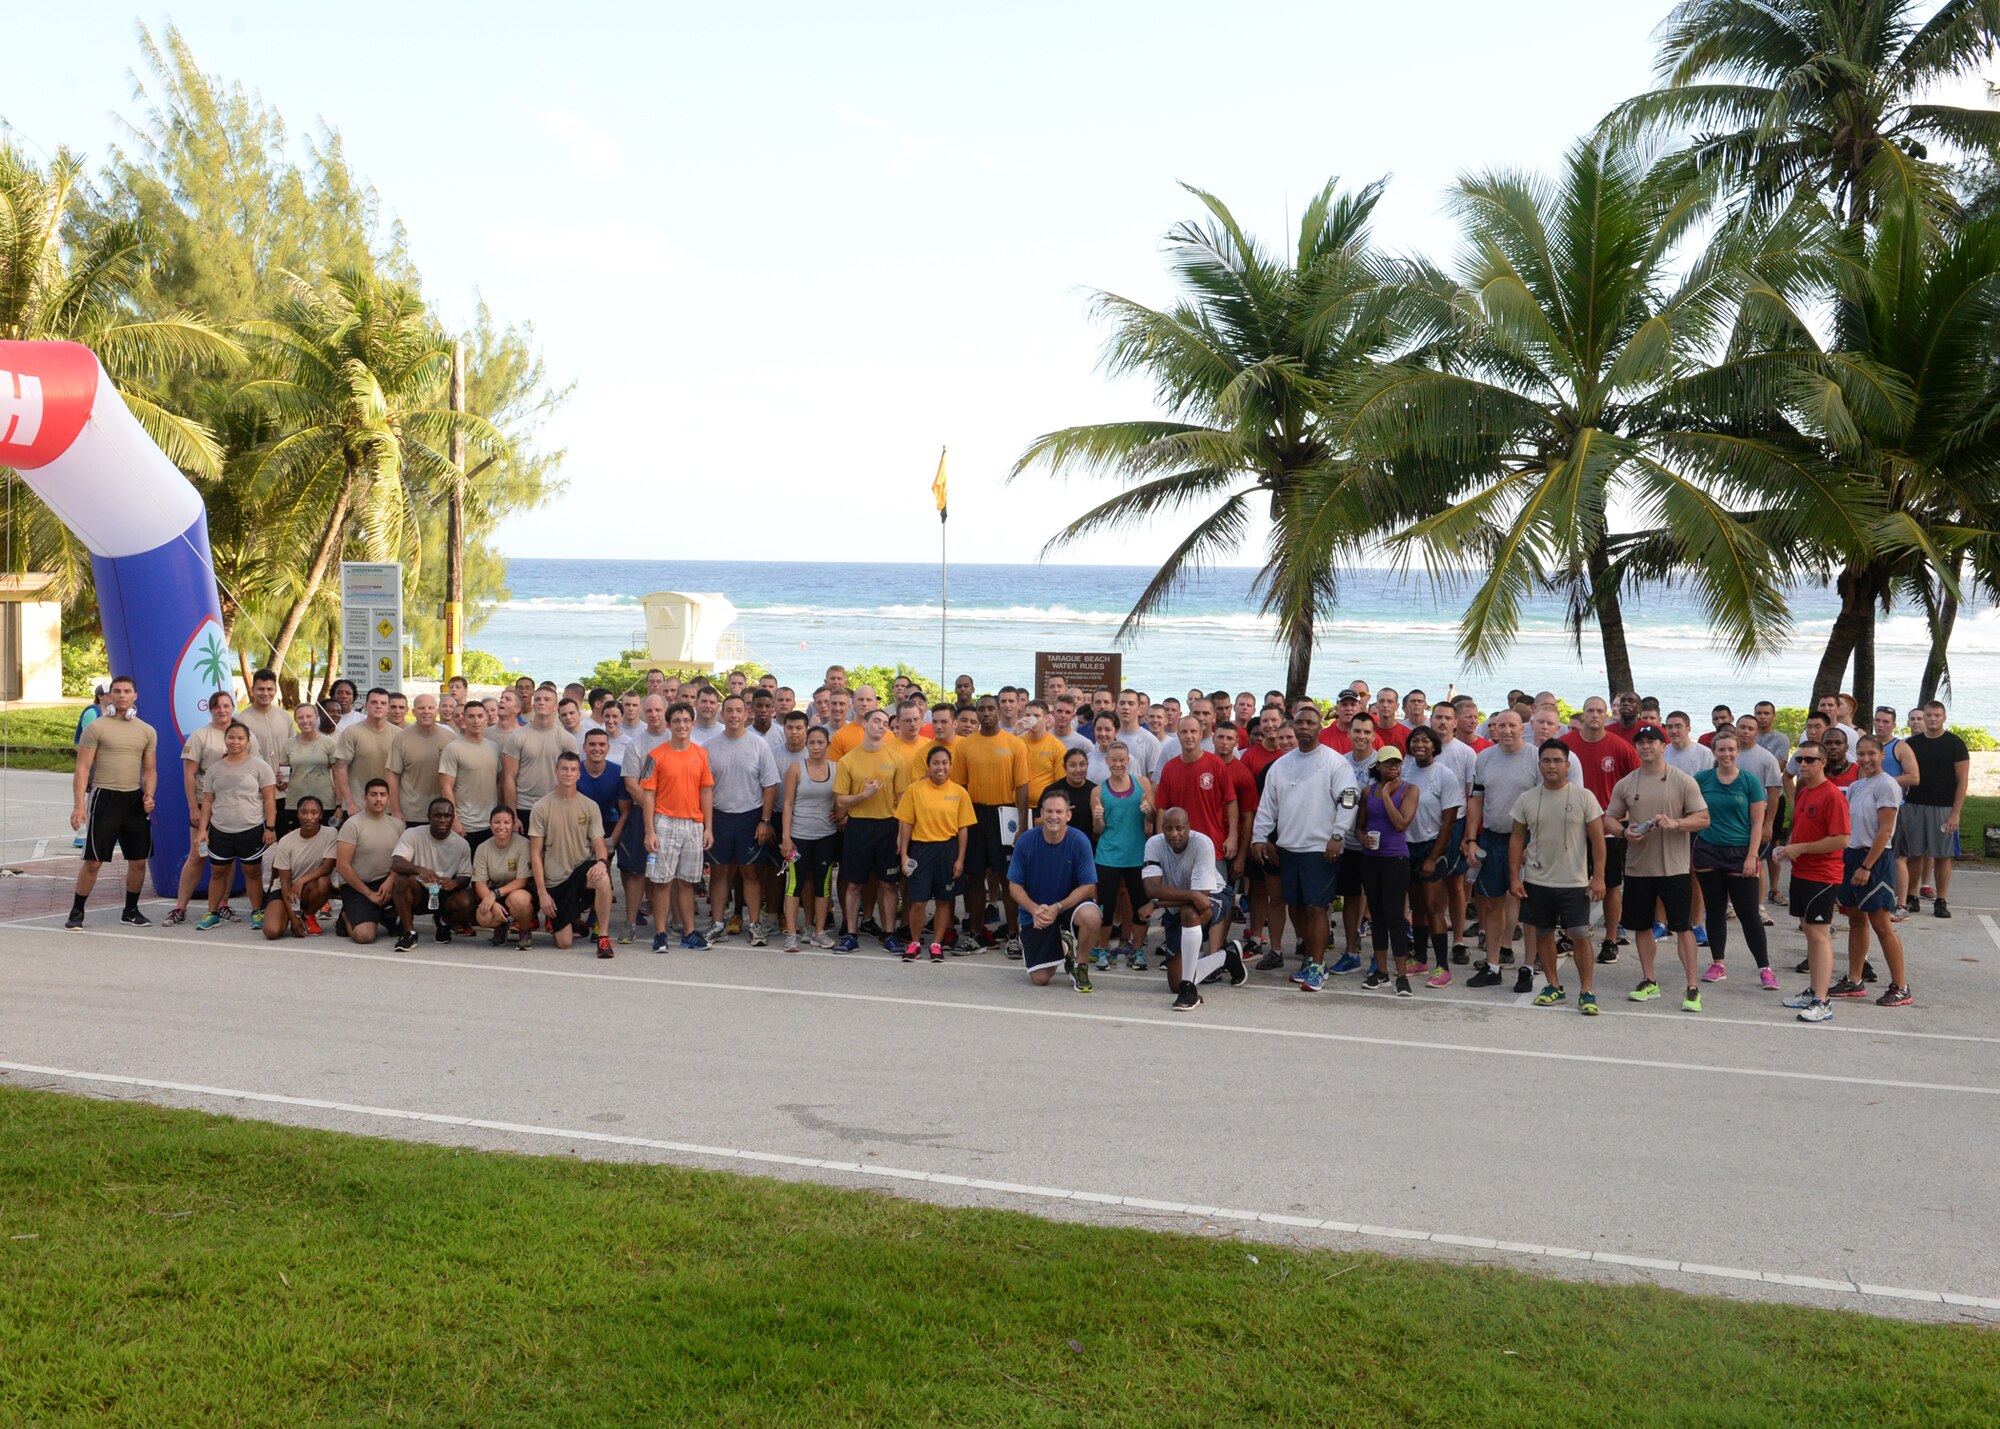 Participants of the 2014 Gobble Wobble 5K Fun Run gather together for a group photo after the event at Tarague Beach at Andersen Air Force Base, Guam. Approximately 100 people participated in the Gobble Wobble as part of the monthly 5K event conducted by Coral Reef Fitness Center Airmen. (U.S. Air Force photo by Senior Airman Katrina M. Brisbin/Released)